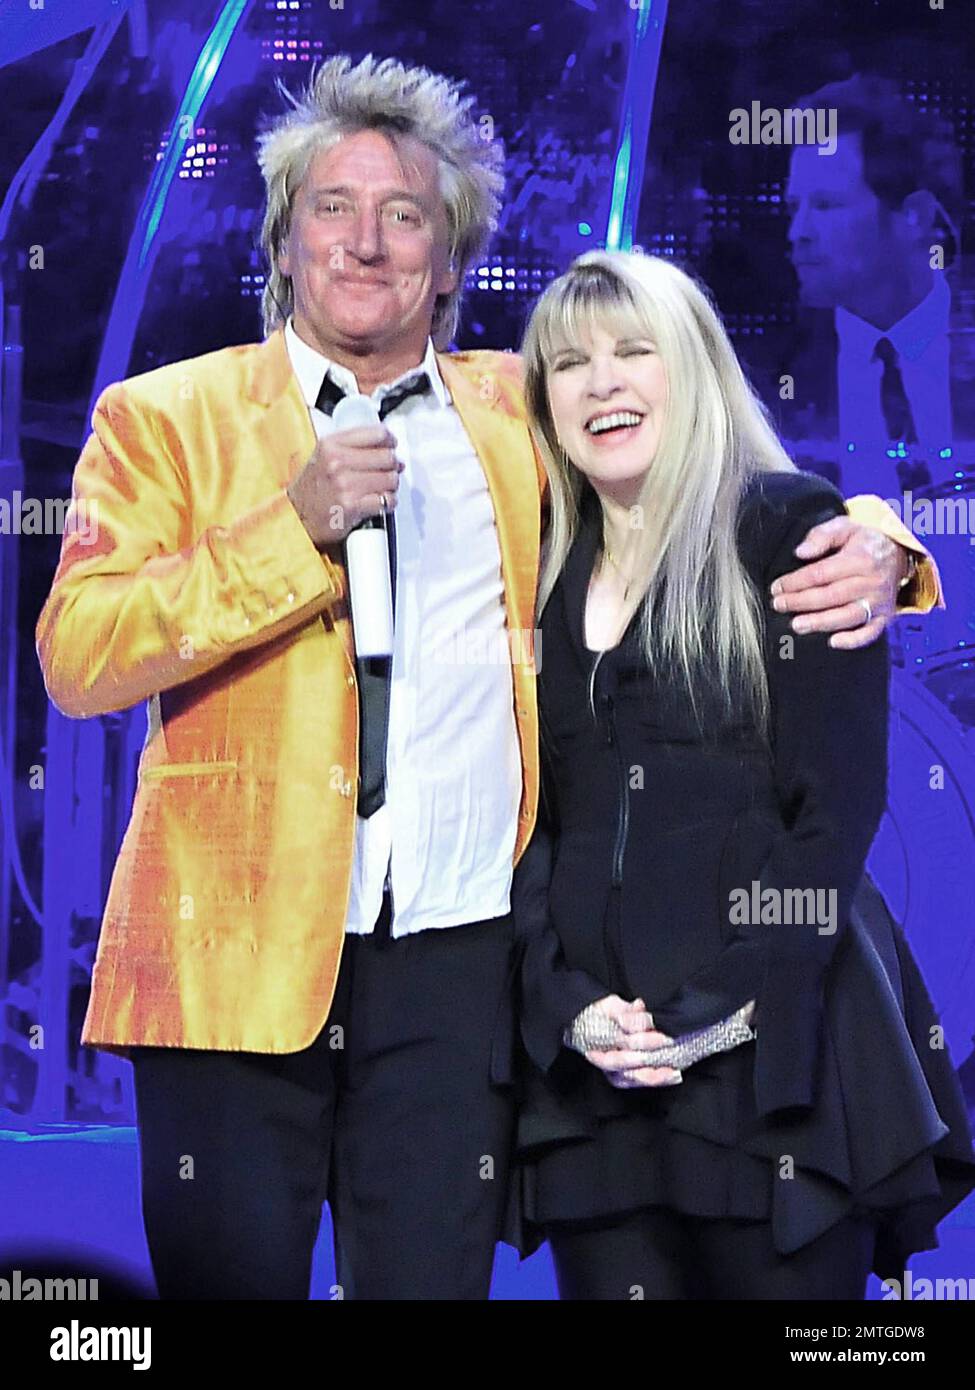 Rod Stewart and Stevie Nicks perform live solo acts and duet at Madison  Square Garden. During his performance Stewart, 66, father of eight  including two youngsters appeared tired at times, holding his